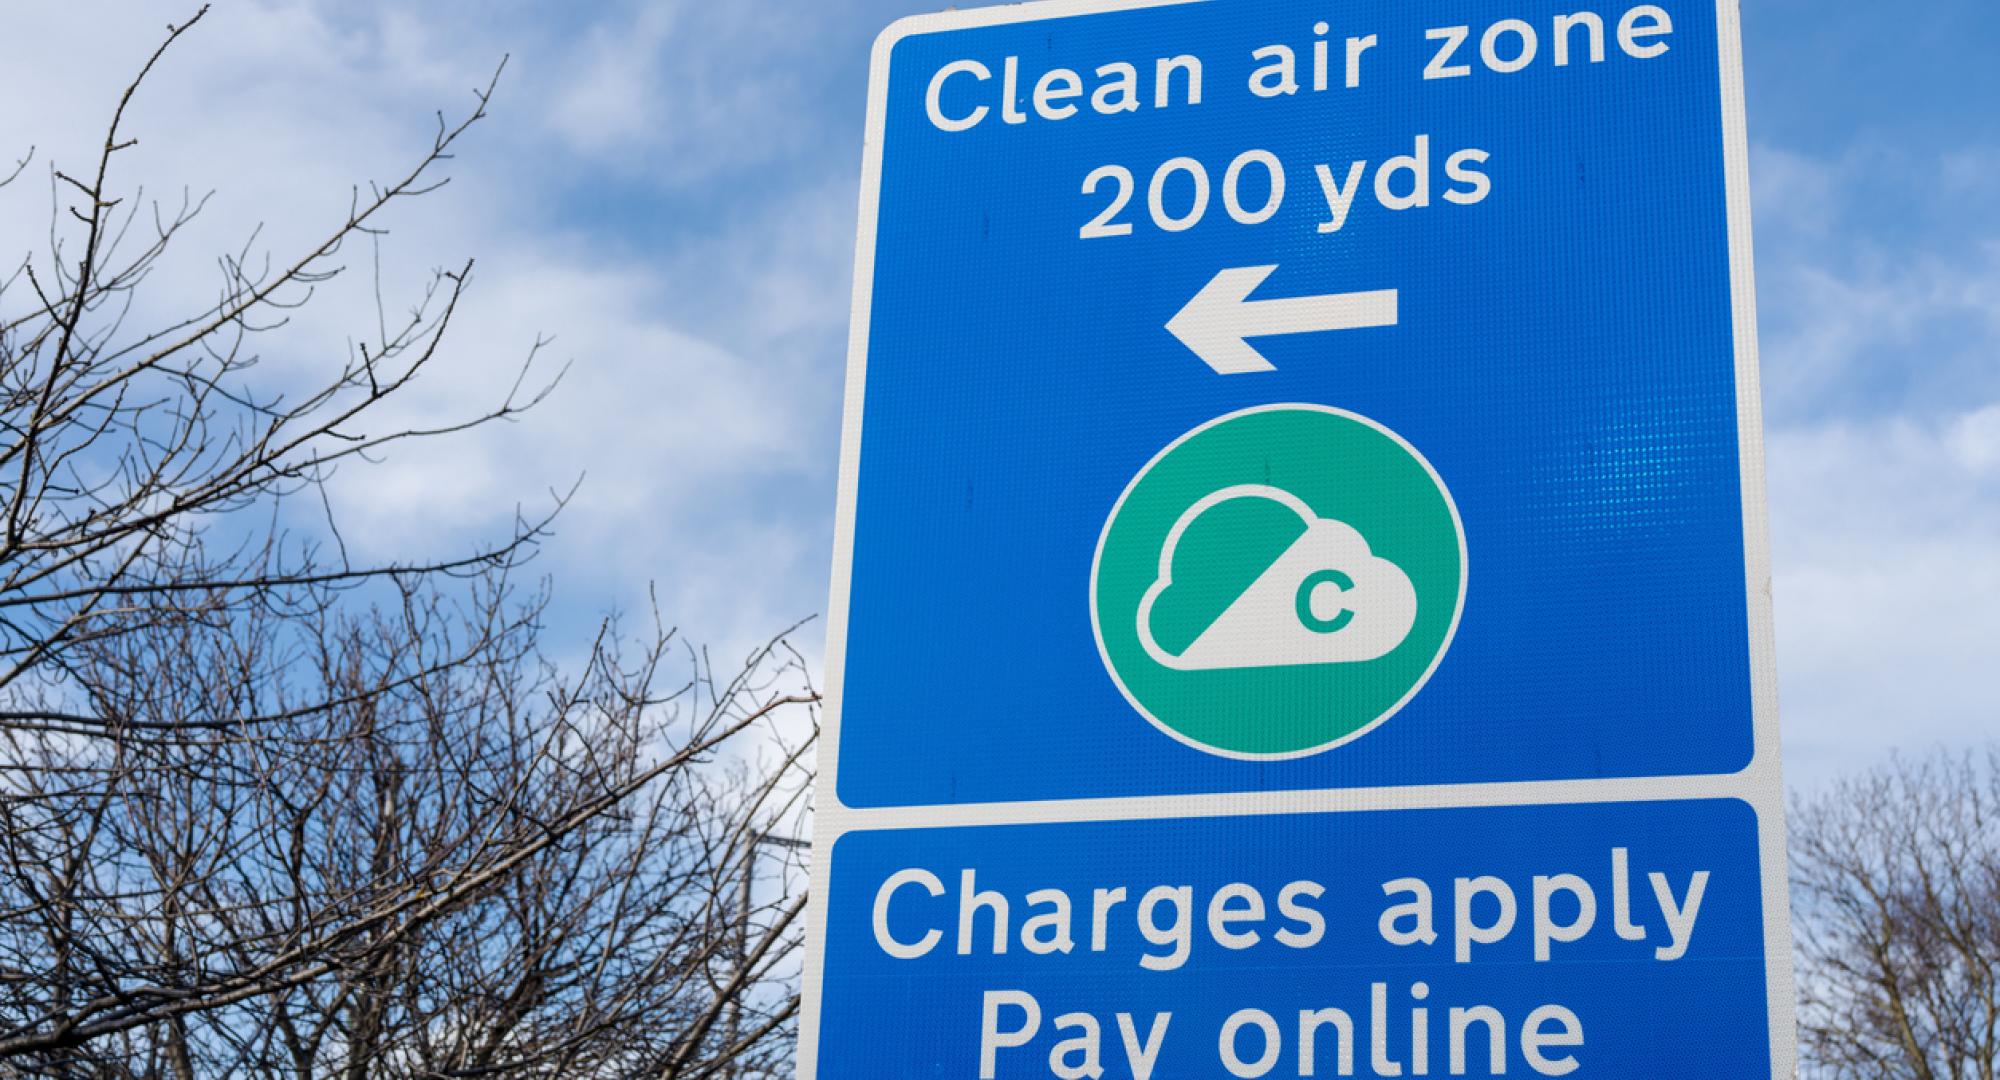 A sign indicates Clean Air Zone (CAZ) charges